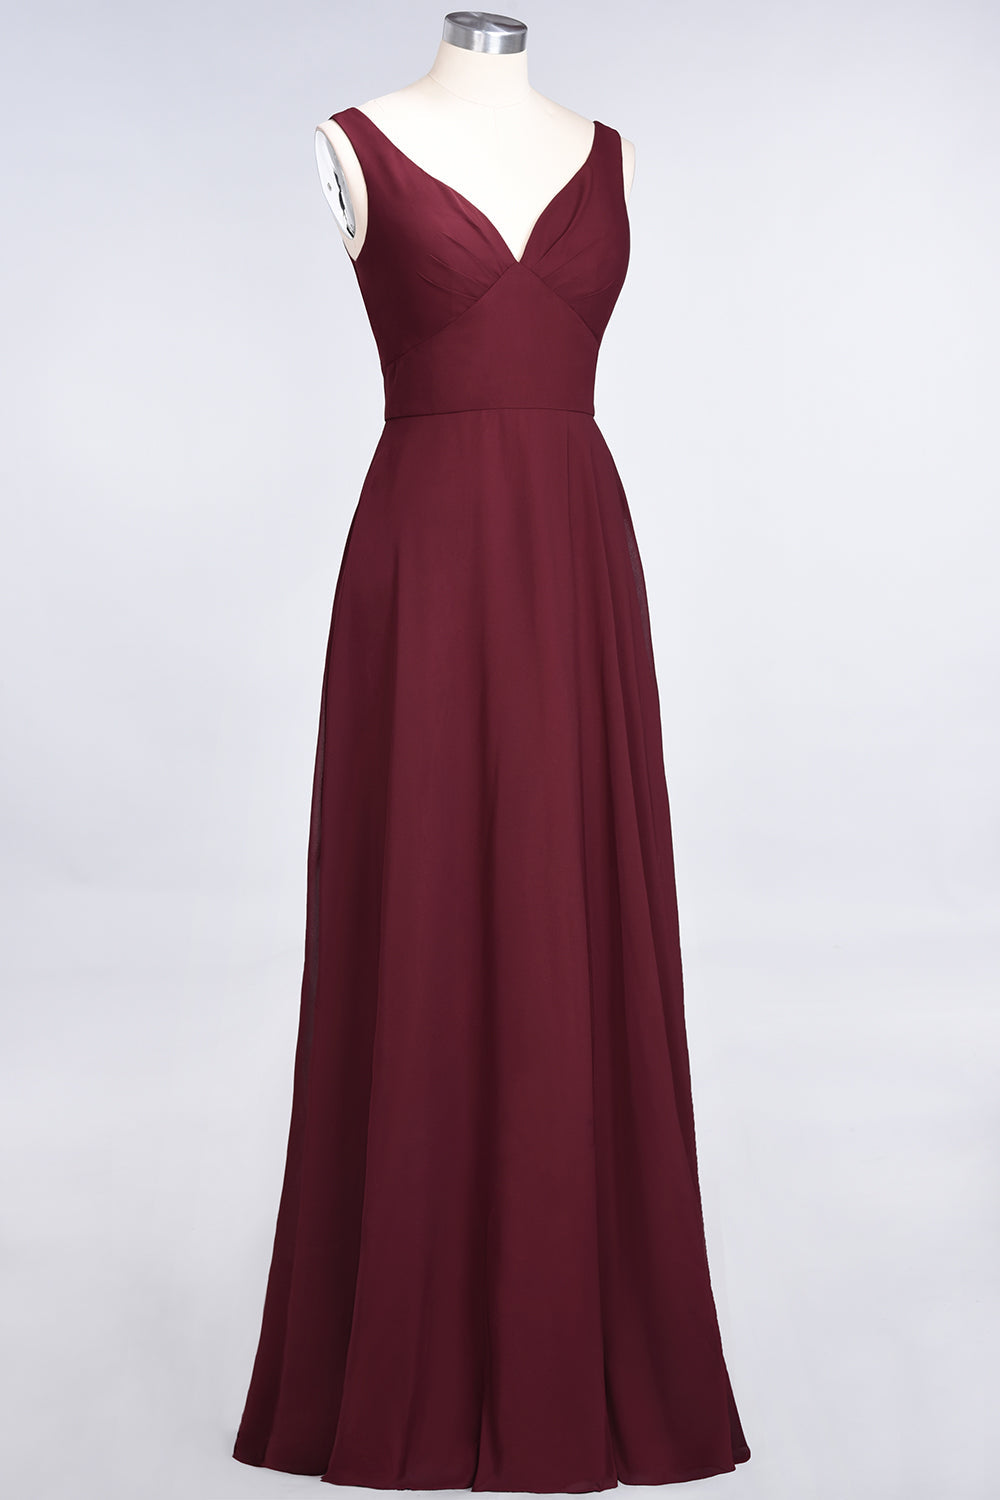 Chic Chiffon V-Neck Straps Ruffle Affordable Bridesmaid Dresses with Open Back